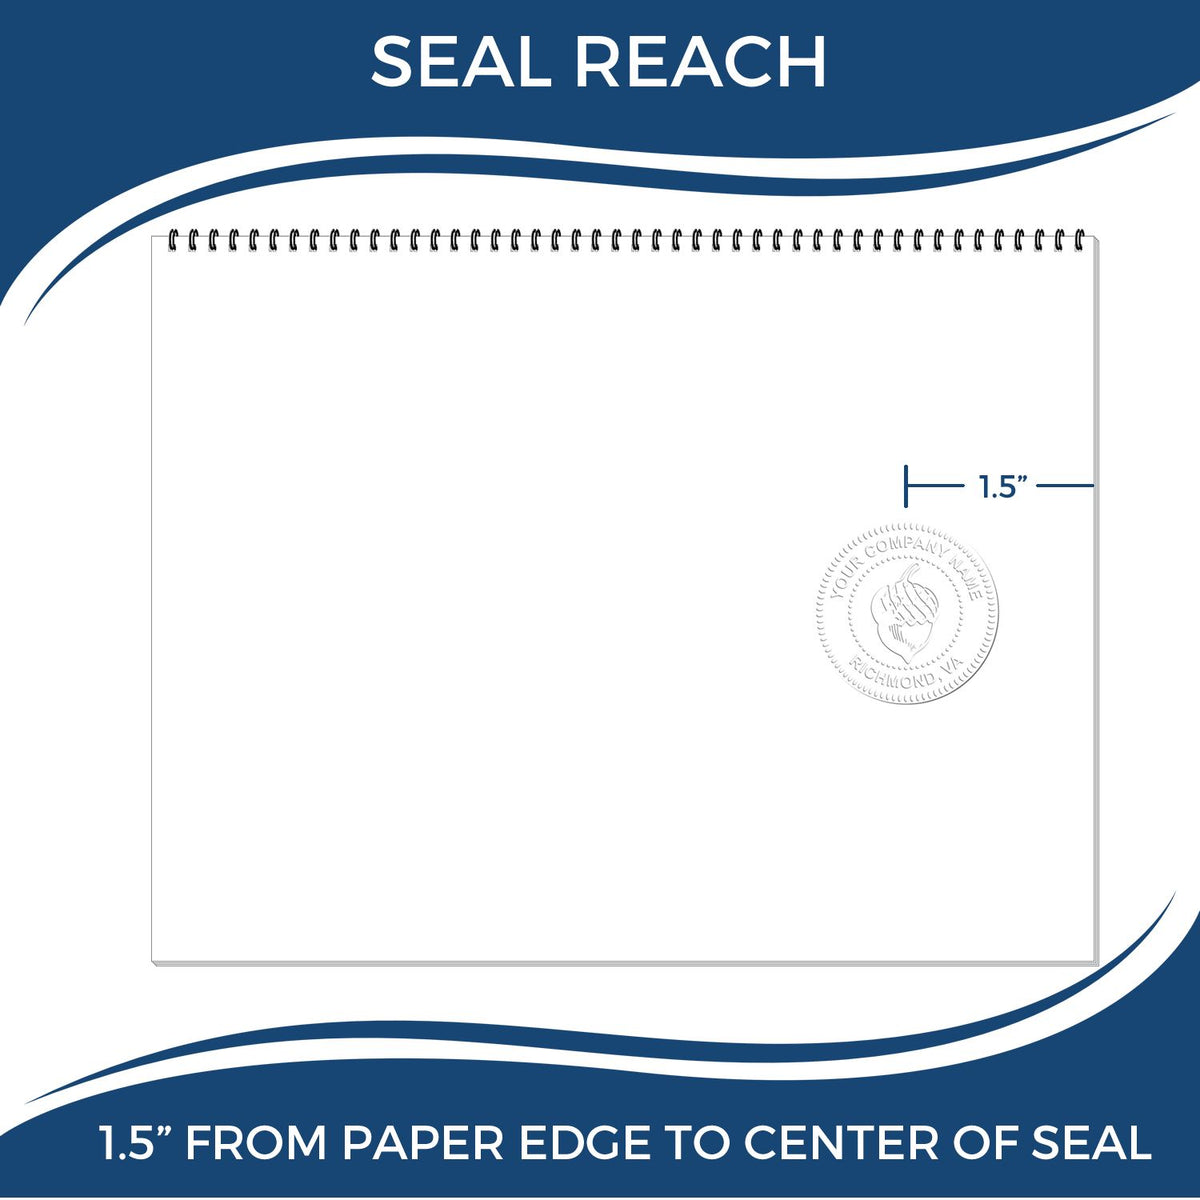 An infographic showing the seal reach which is represented by a ruler and a miniature seal image of the Gift Minnesota Land Surveyor Seal